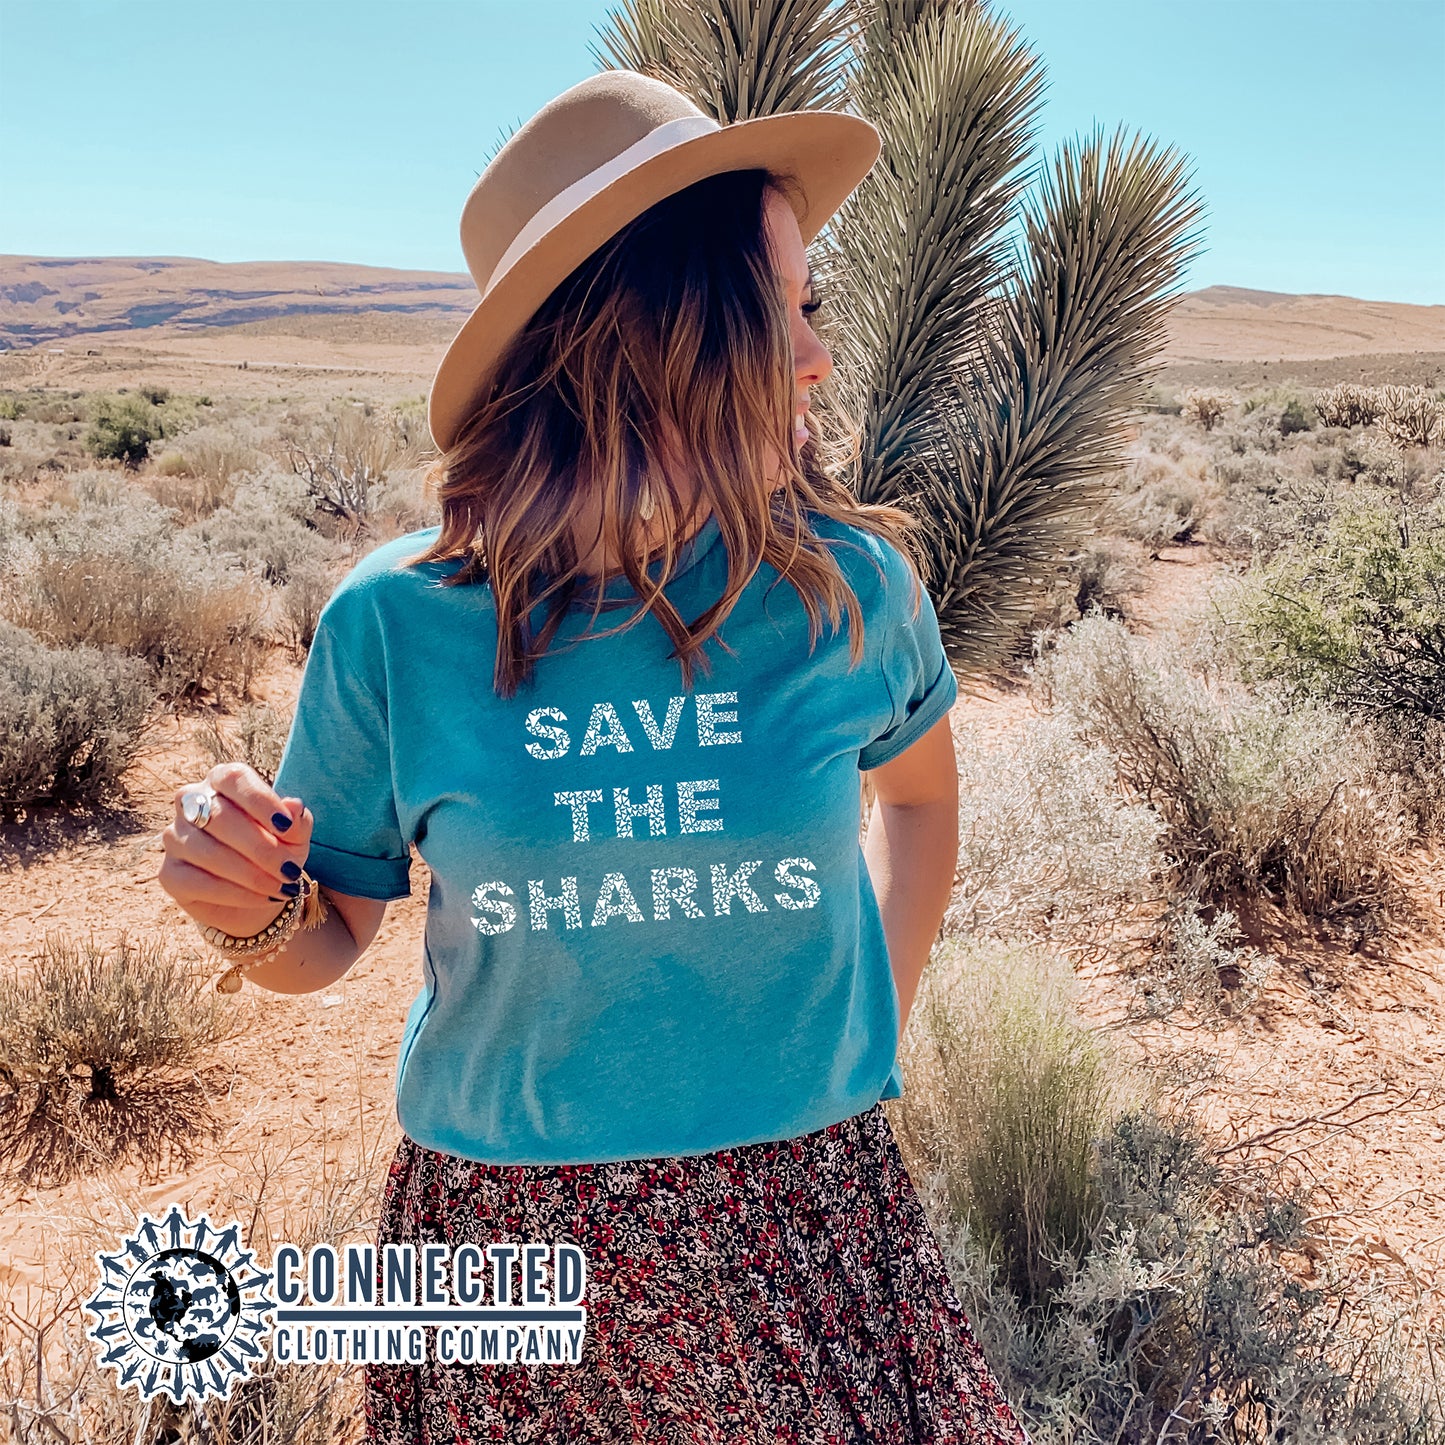 Aqua Blue Save The Sharks Short-Sleeve Unisex T-Shirt reads "Save The Sharks." - sweetsherriloudesigns - Ethically and Sustainably Made - 10% donated to Oceana shark conservation